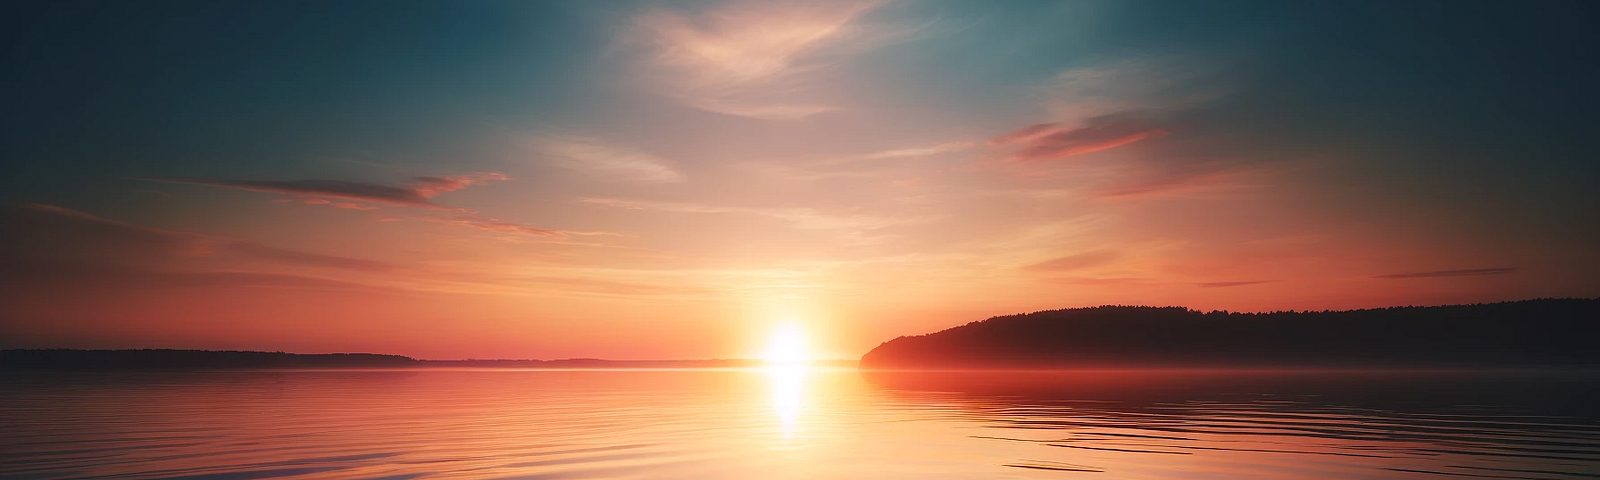 Serene sunrise over a calm lake with a vibrant display of orange, pink, and blue gradients in the sky. The sun is just above the horizon, casting a warm glow and reflecting on the smooth water surface. A distant treeline outlines the quiet and tranquil scene, ideal for contemplation.